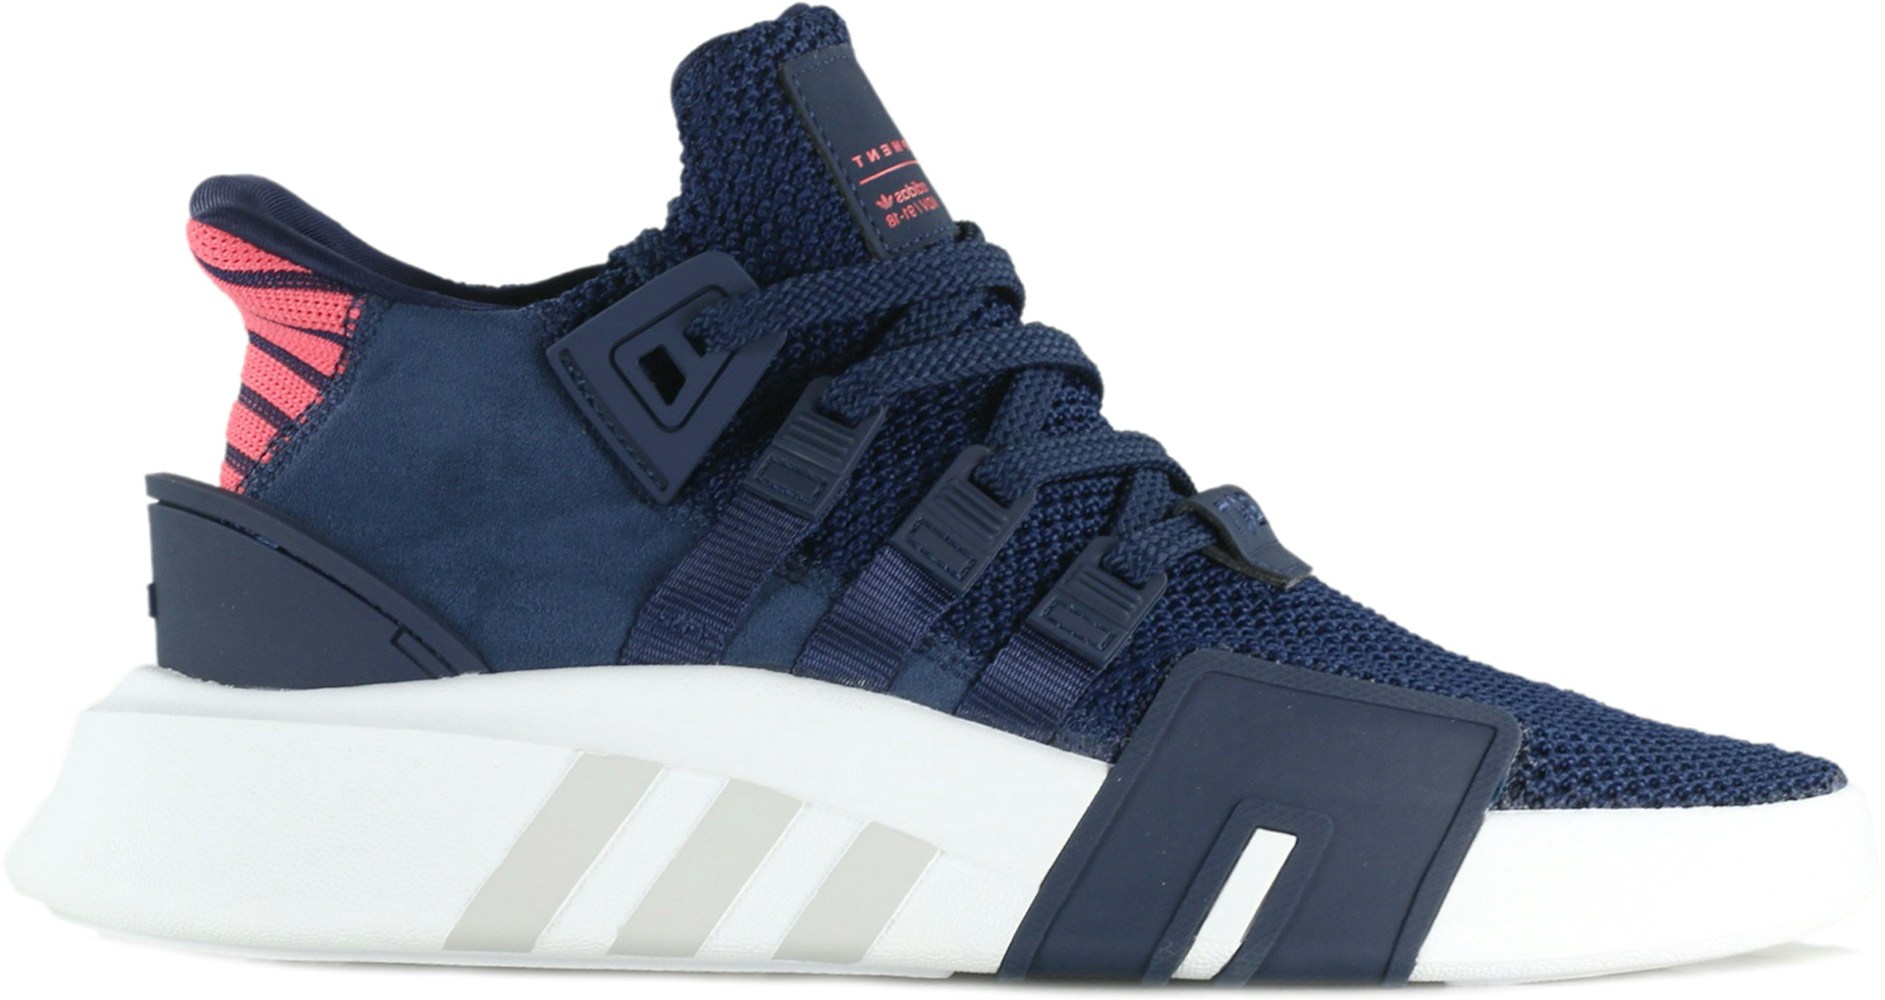 adidas EQT Basketball Adv Collegiate Navy Real Coral